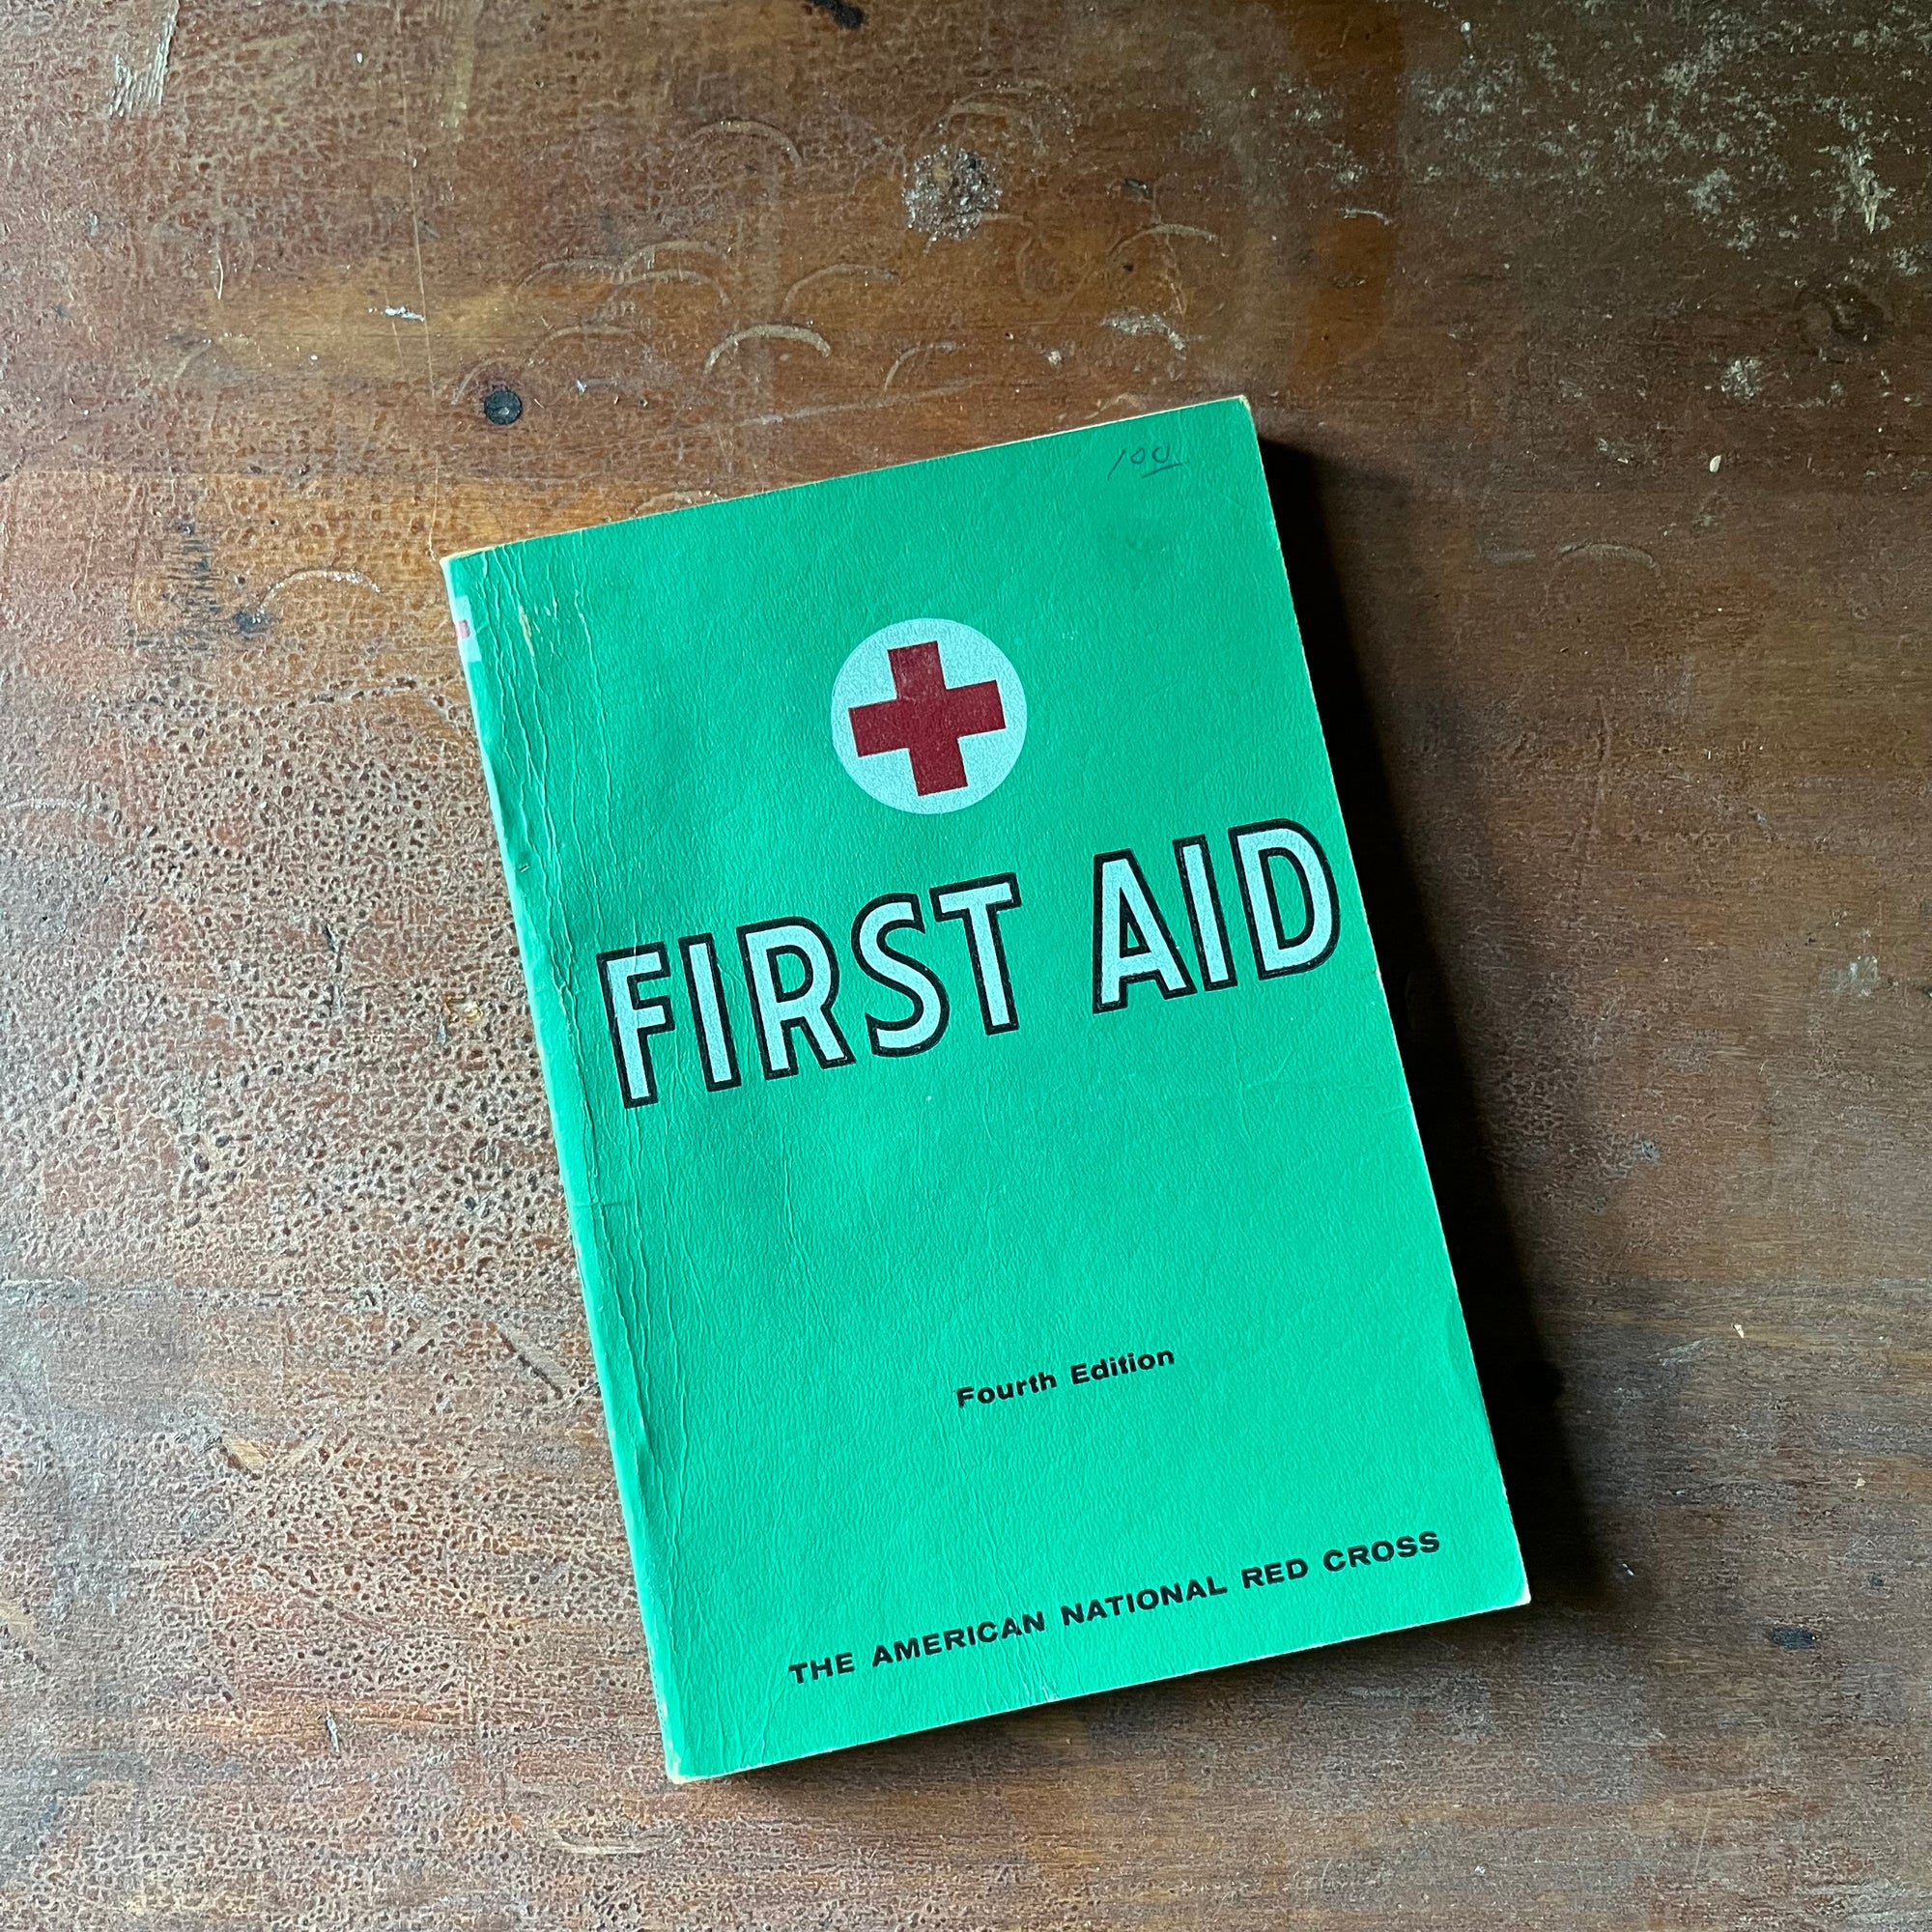 The American Red Cross First Aid Textbook 4th Edition - front cover shown sitting on a wood table